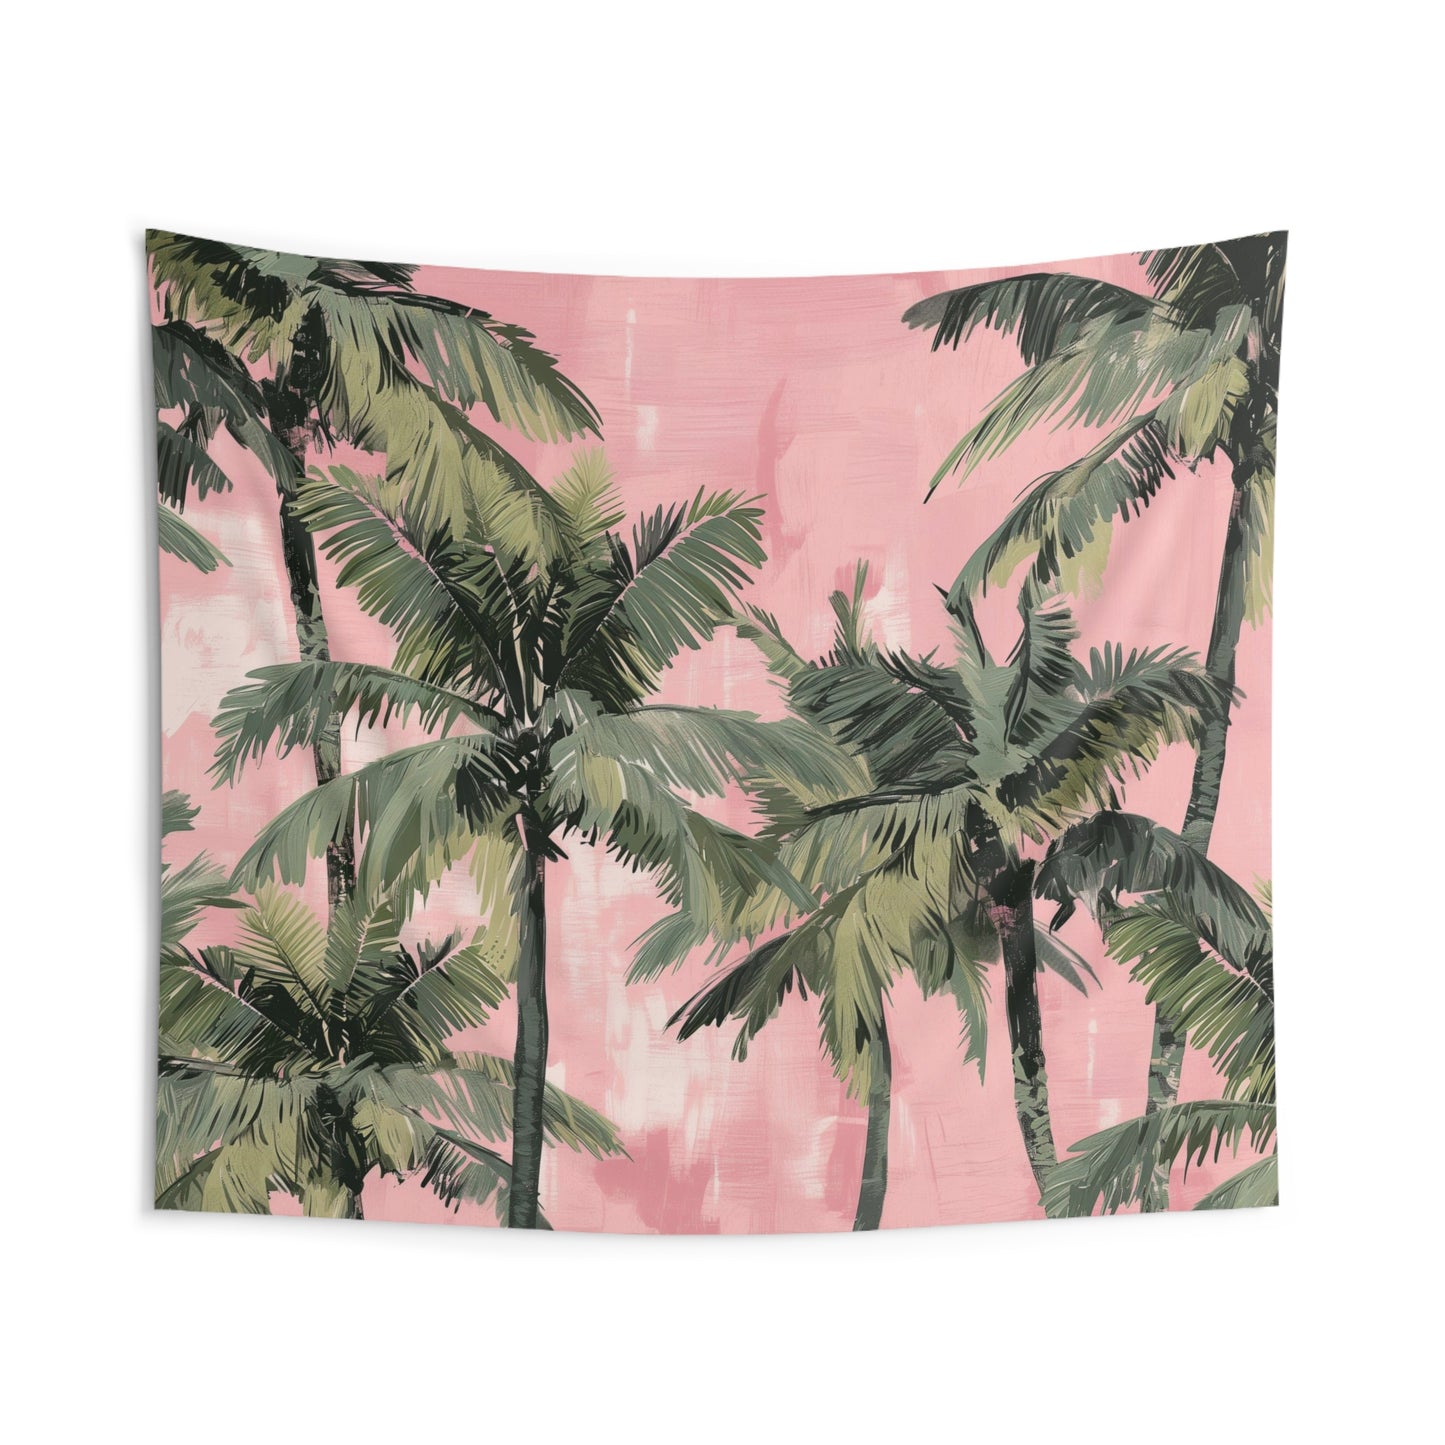 Palm Trees Tapestry, Green Pink Wall Art Hanging Cool Unique Landscape Aesthetic Large Small Decor Bedroom College Dorm Room